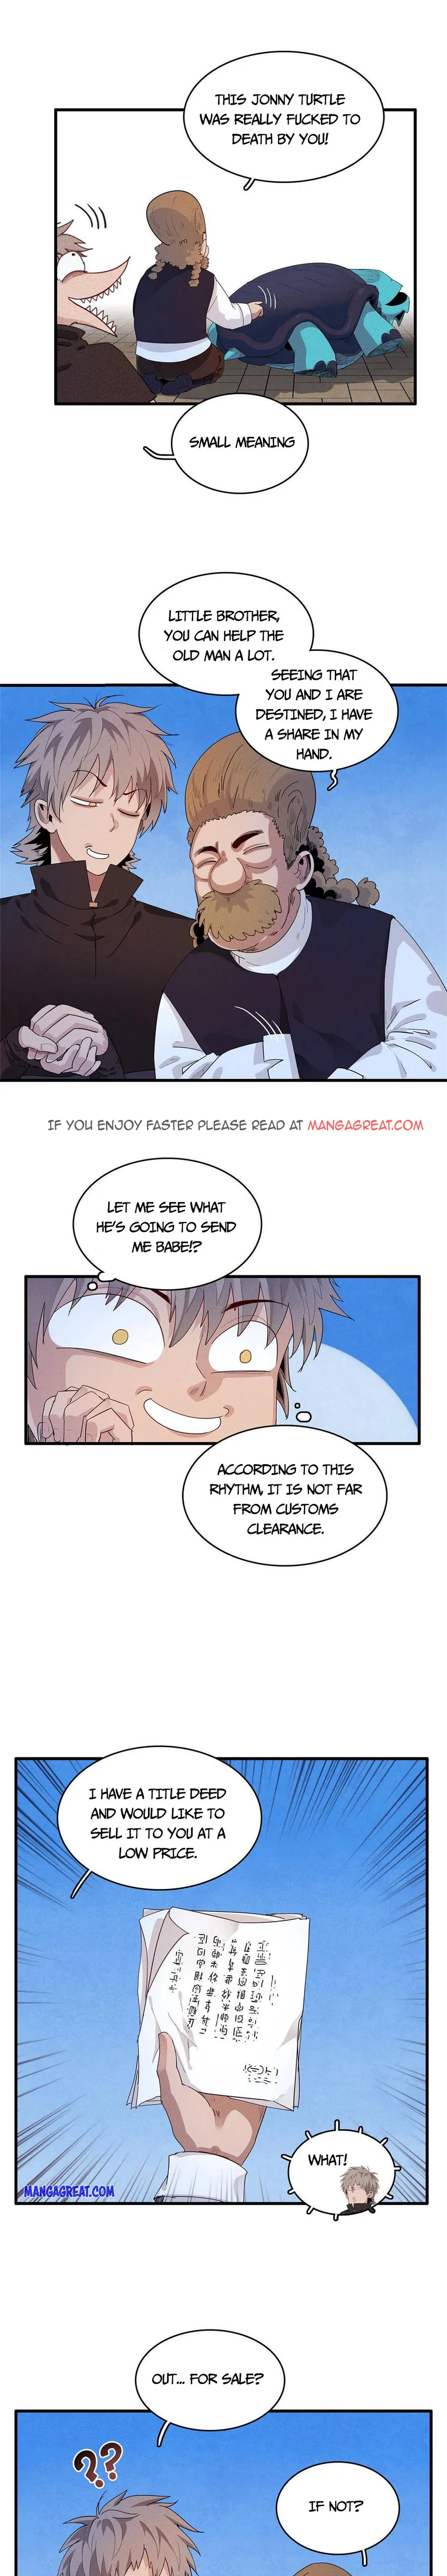 From Now On, I Will Be The Father Of The Mage - Page 2